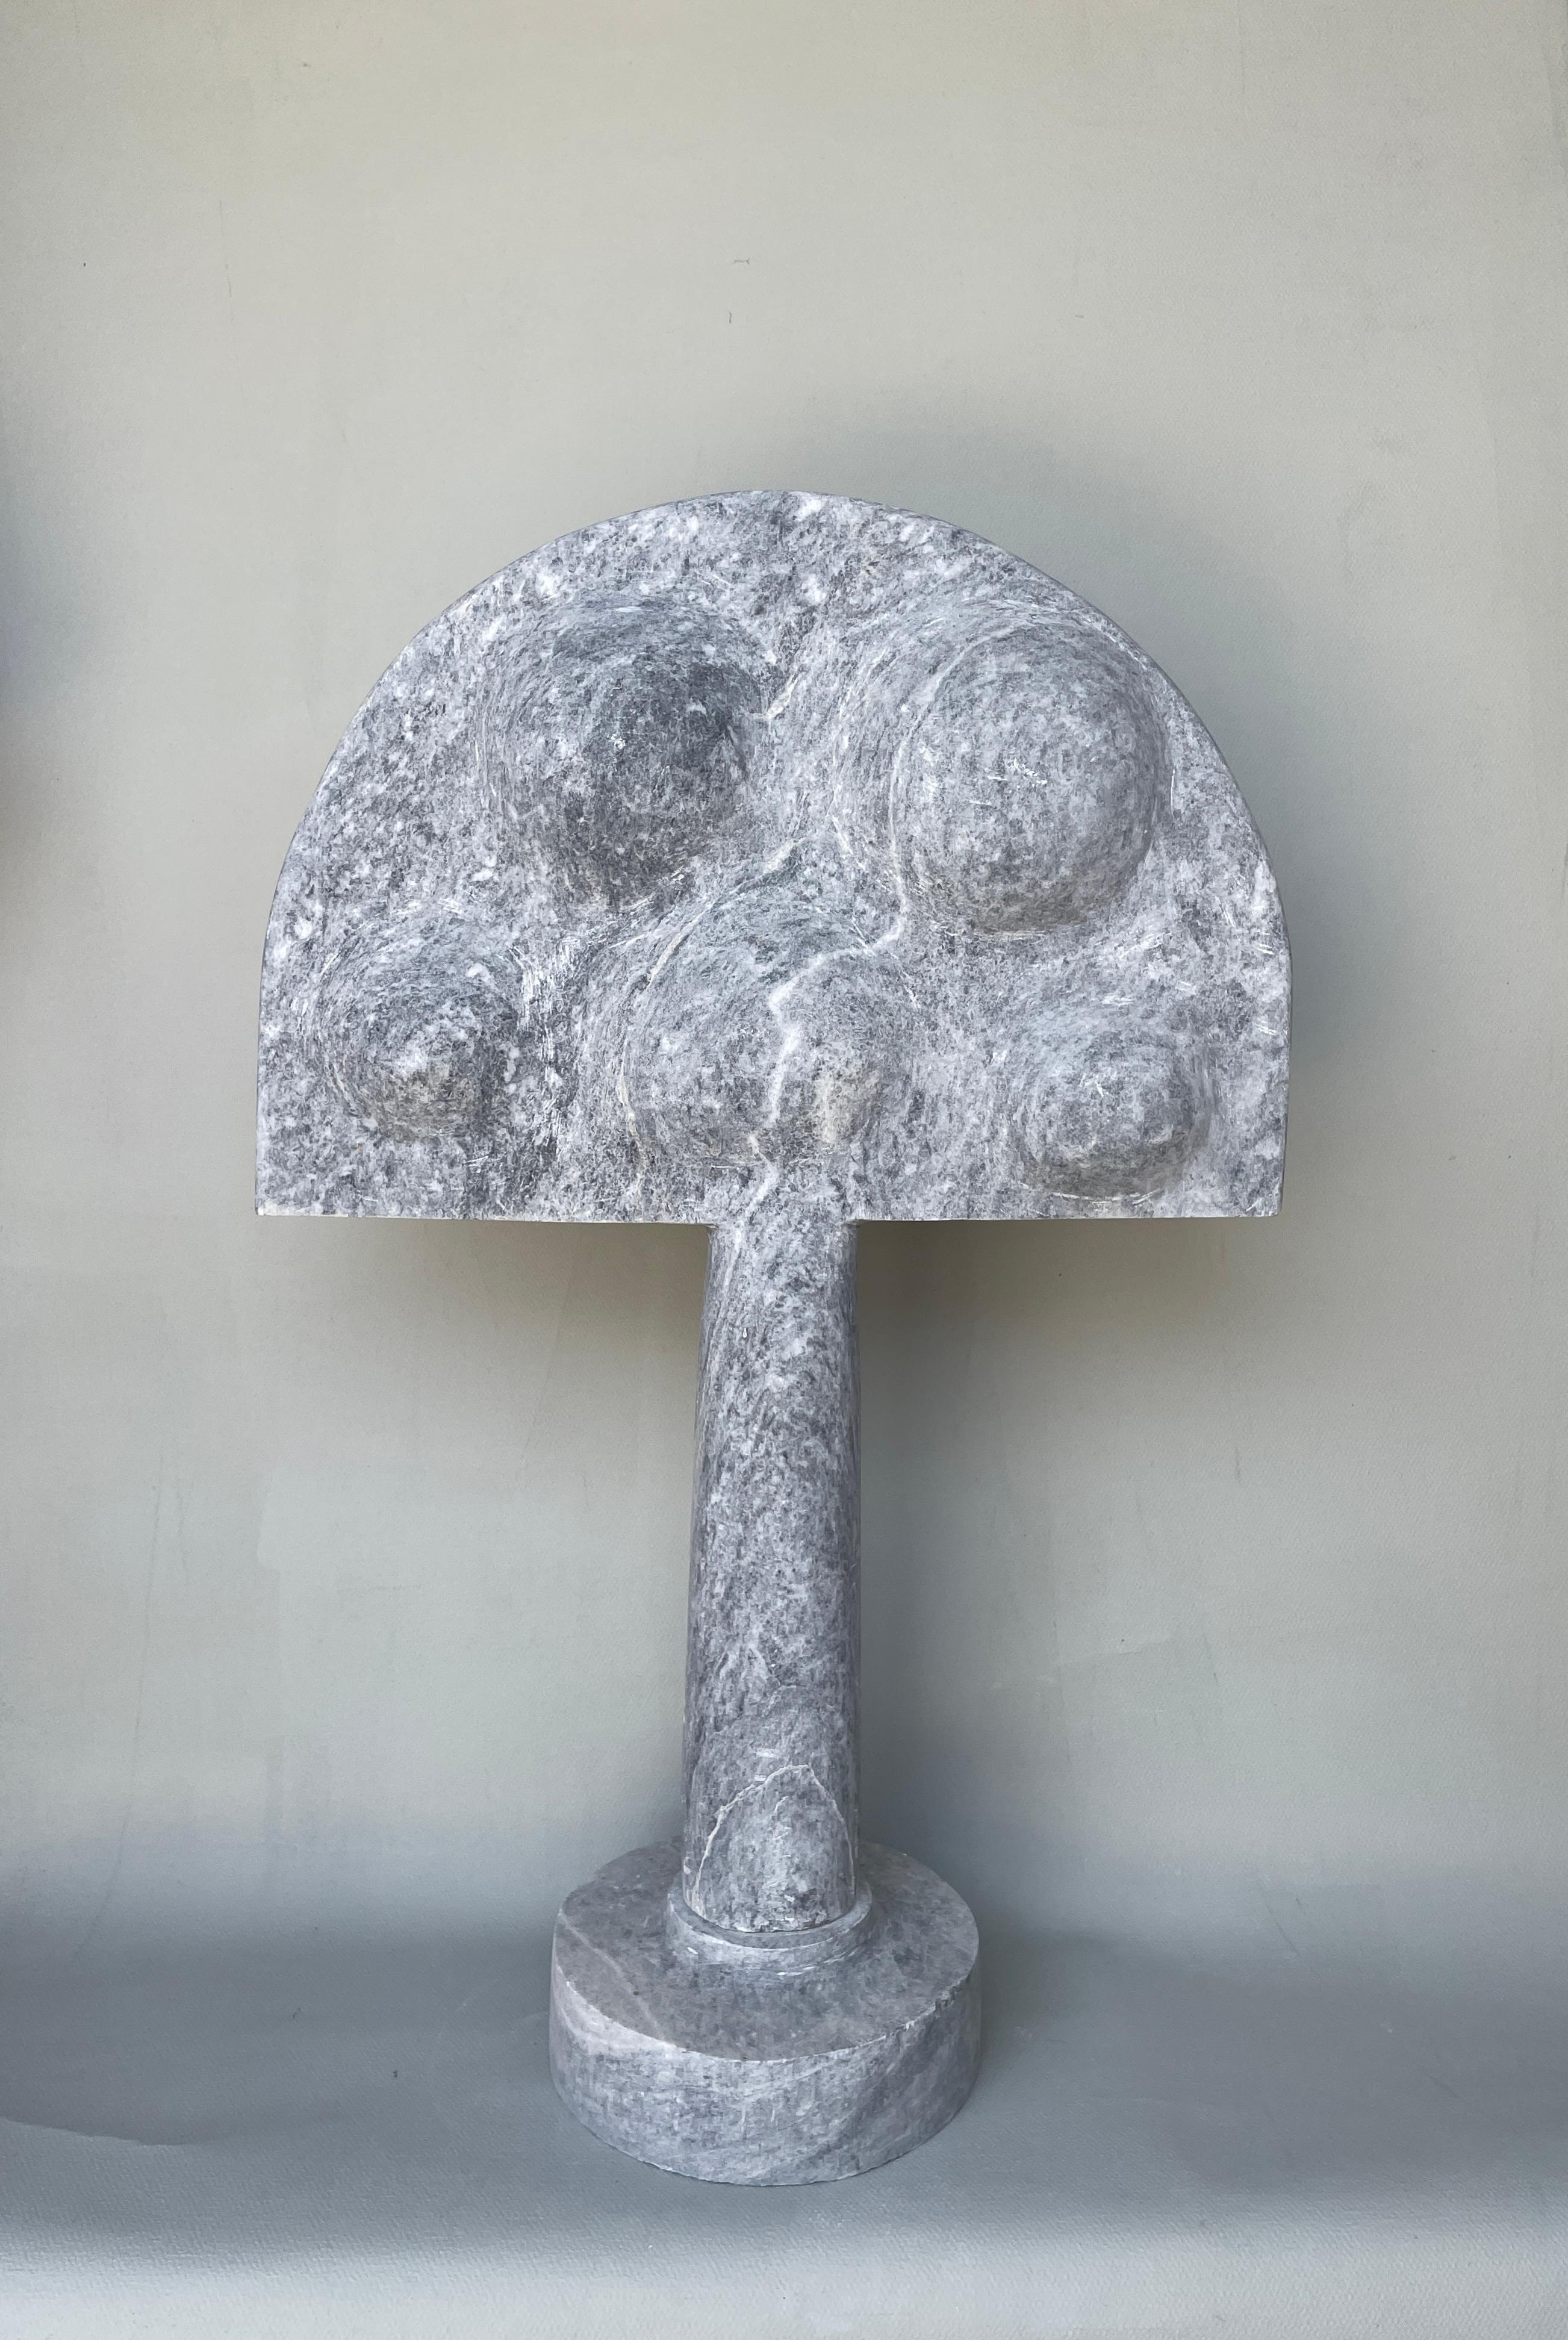 Heraldic Form marble sculpture by Tom Von Kaenel
Dimensions: D 8 x W 41 x H 60 cm
Materials: marble

Tom von Kaenel, sculptor and painter, was born in Switzerland in 1961. Already in his early childhood he was deeply devoted to art. His desire